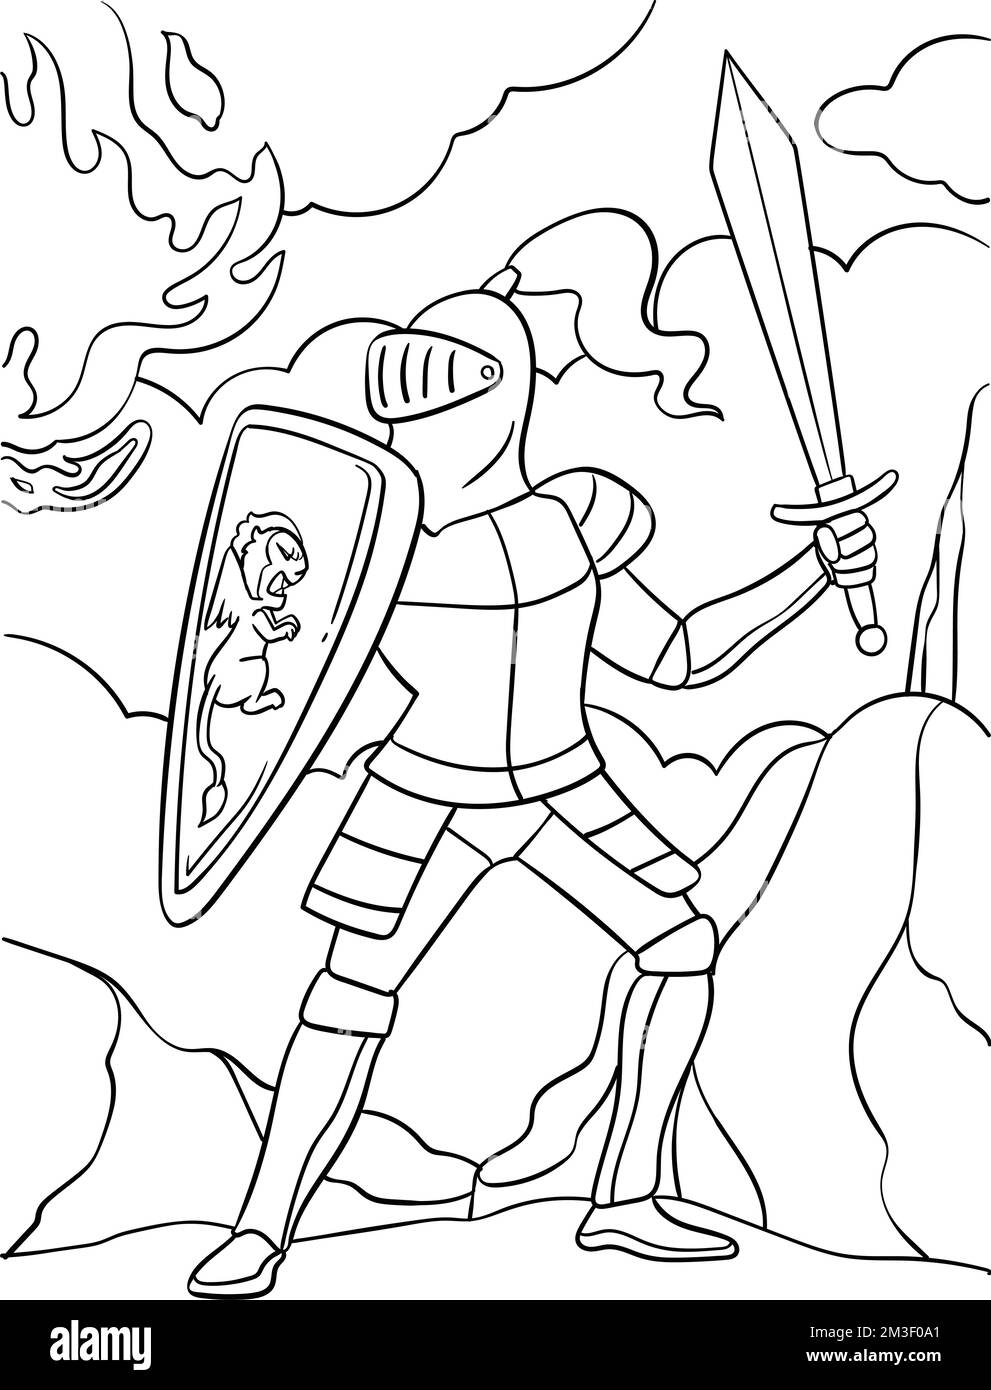 Knight in a Fighting Pose Coloring Page for Kids Stock Vector